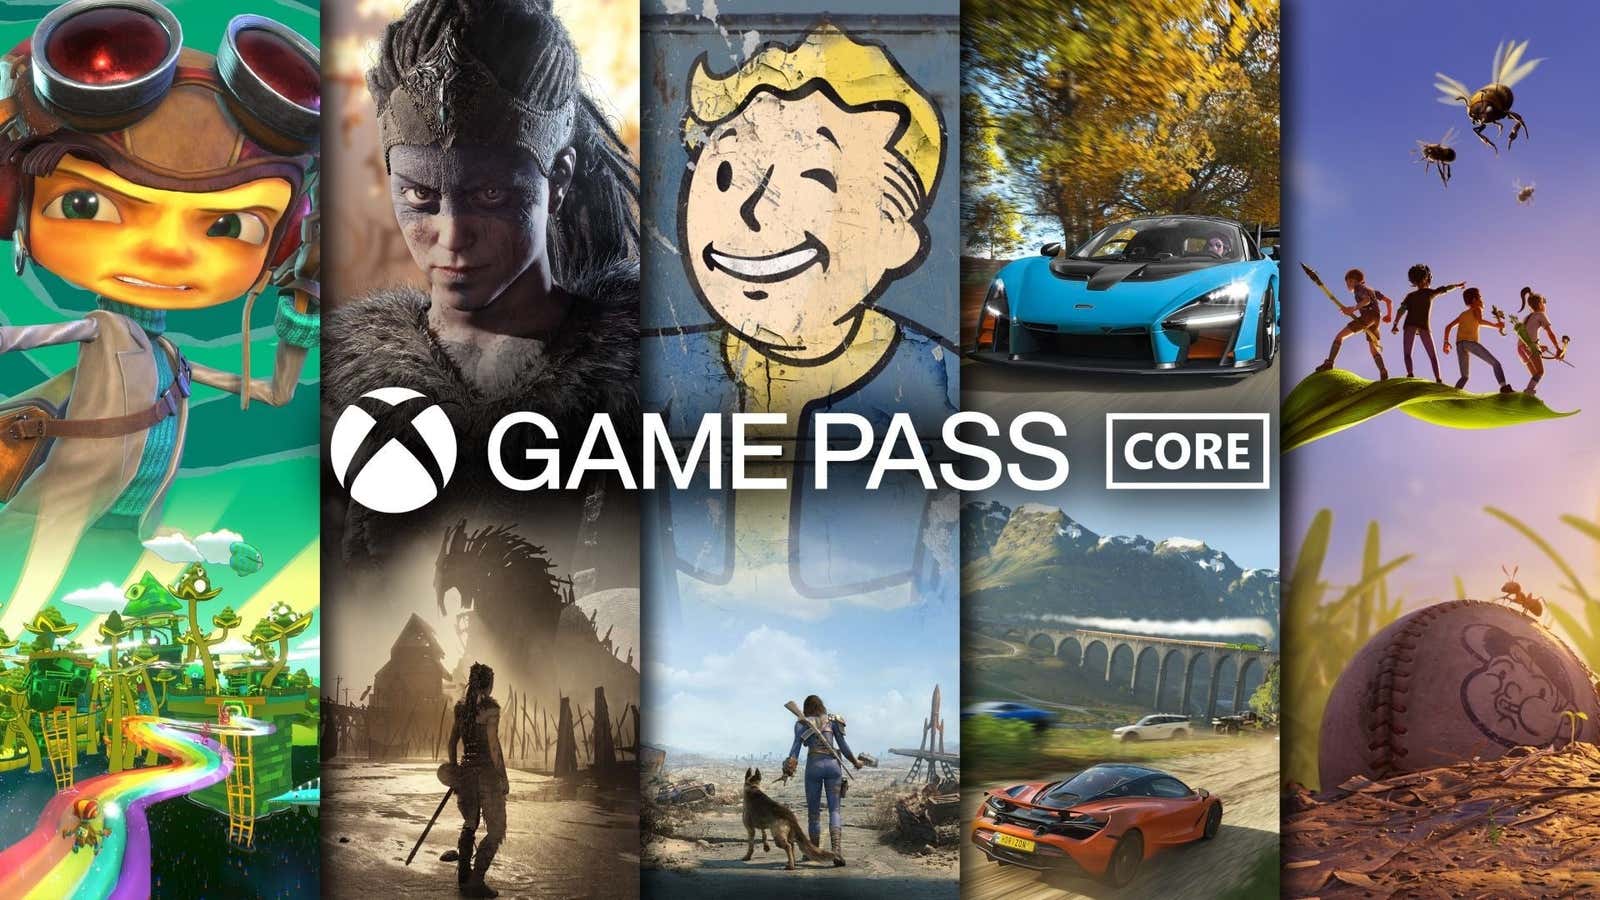 An image shows an ad for Game Pass Core and the‍ games⁢ it comes with.